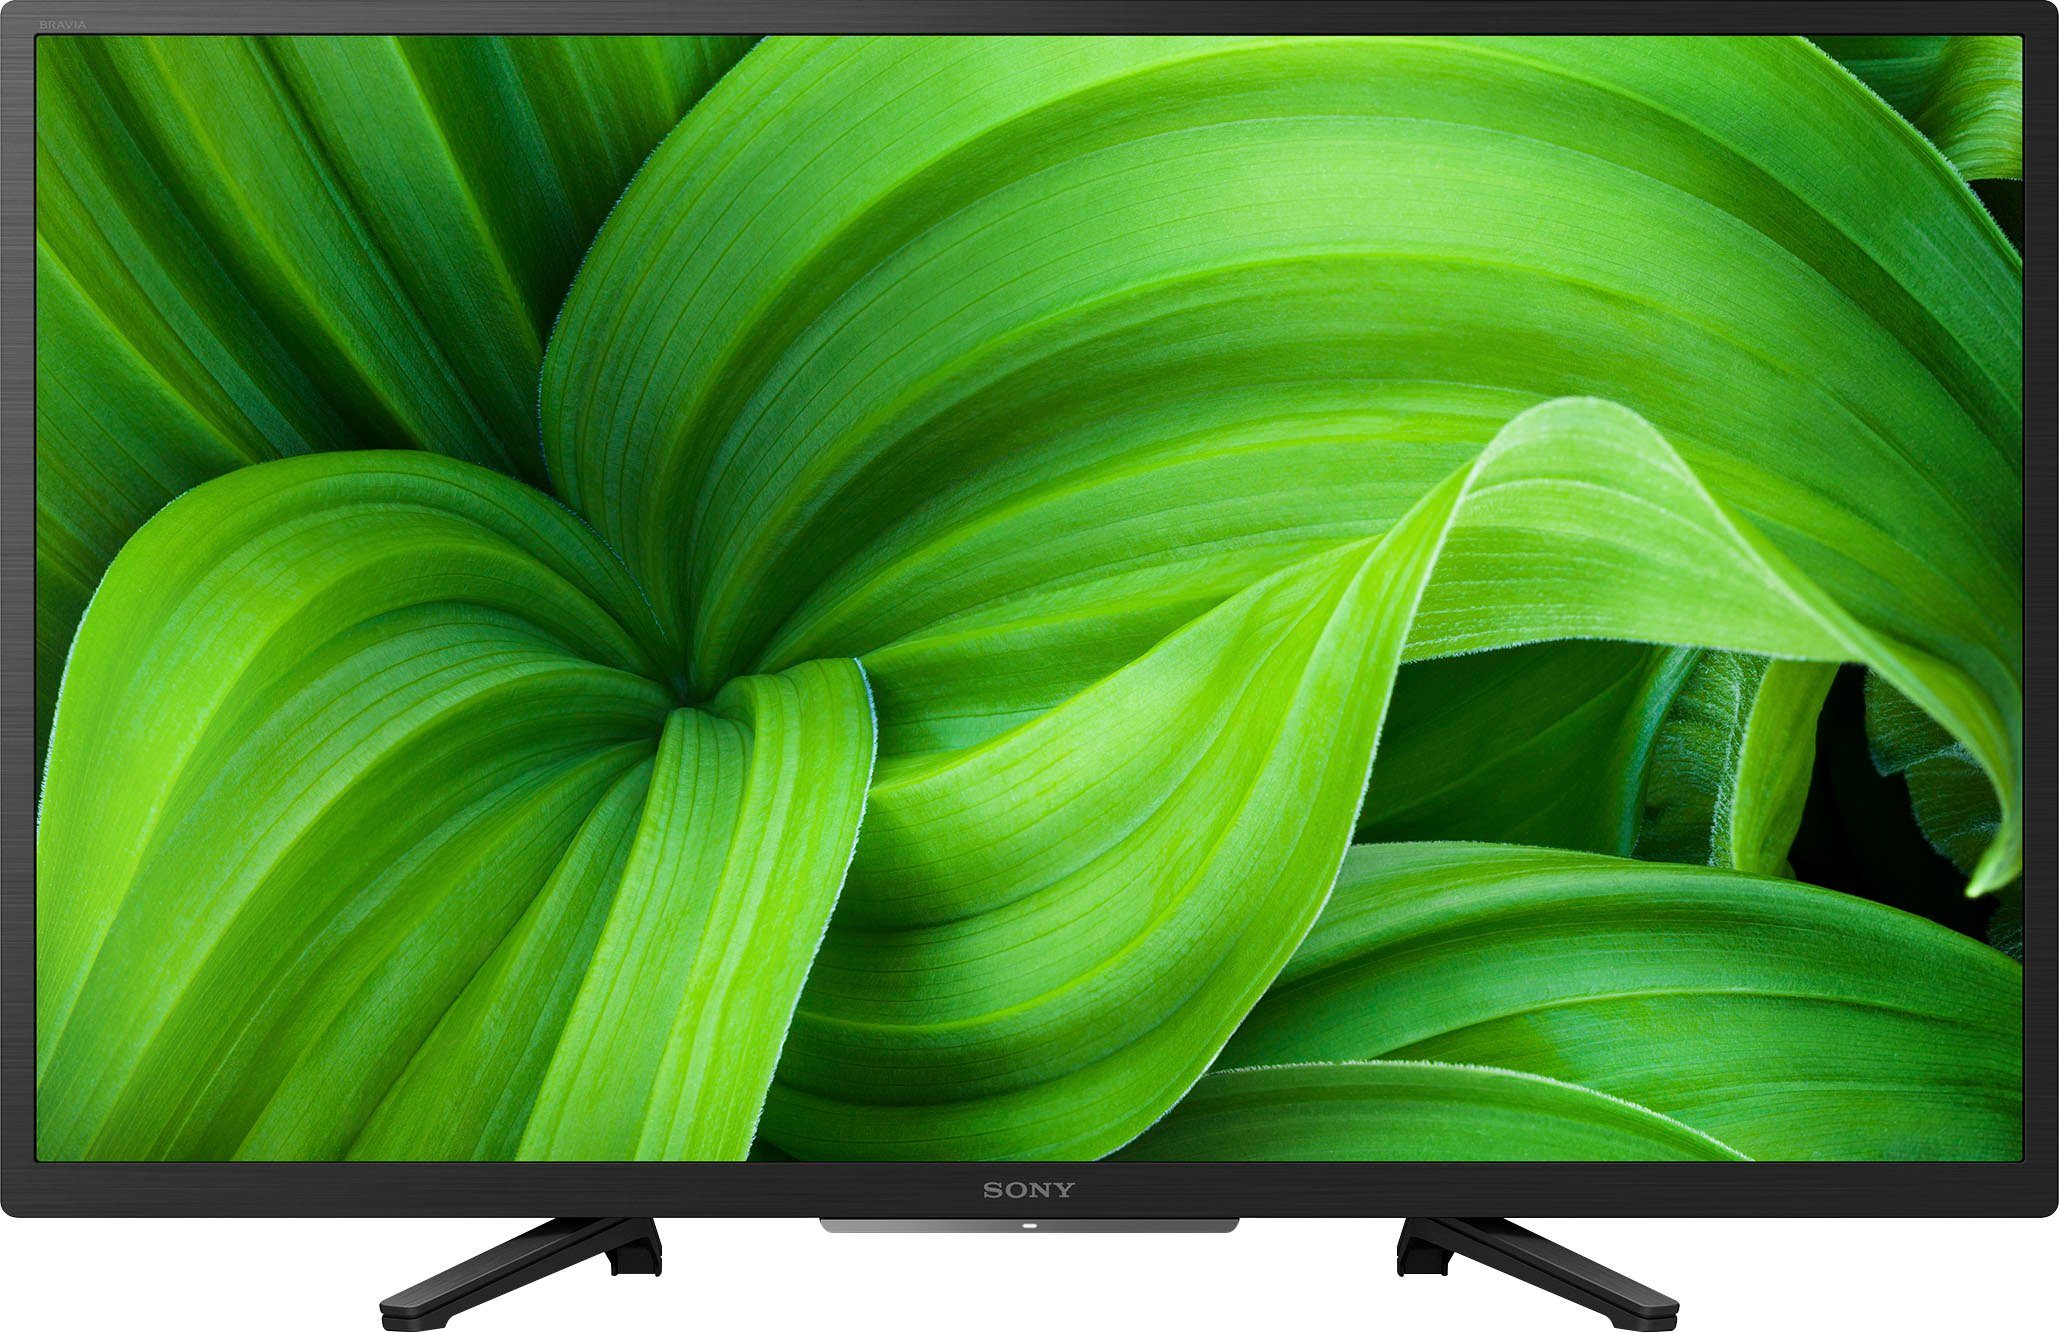 Sony KD-32W800 LCD-LED Fernseher (80 cm/32 Zoll, WXGA, Android TV, BRAVIA,  HD Heady, Smart TV, Triple Tuner, HDR) online kaufen | OTTO